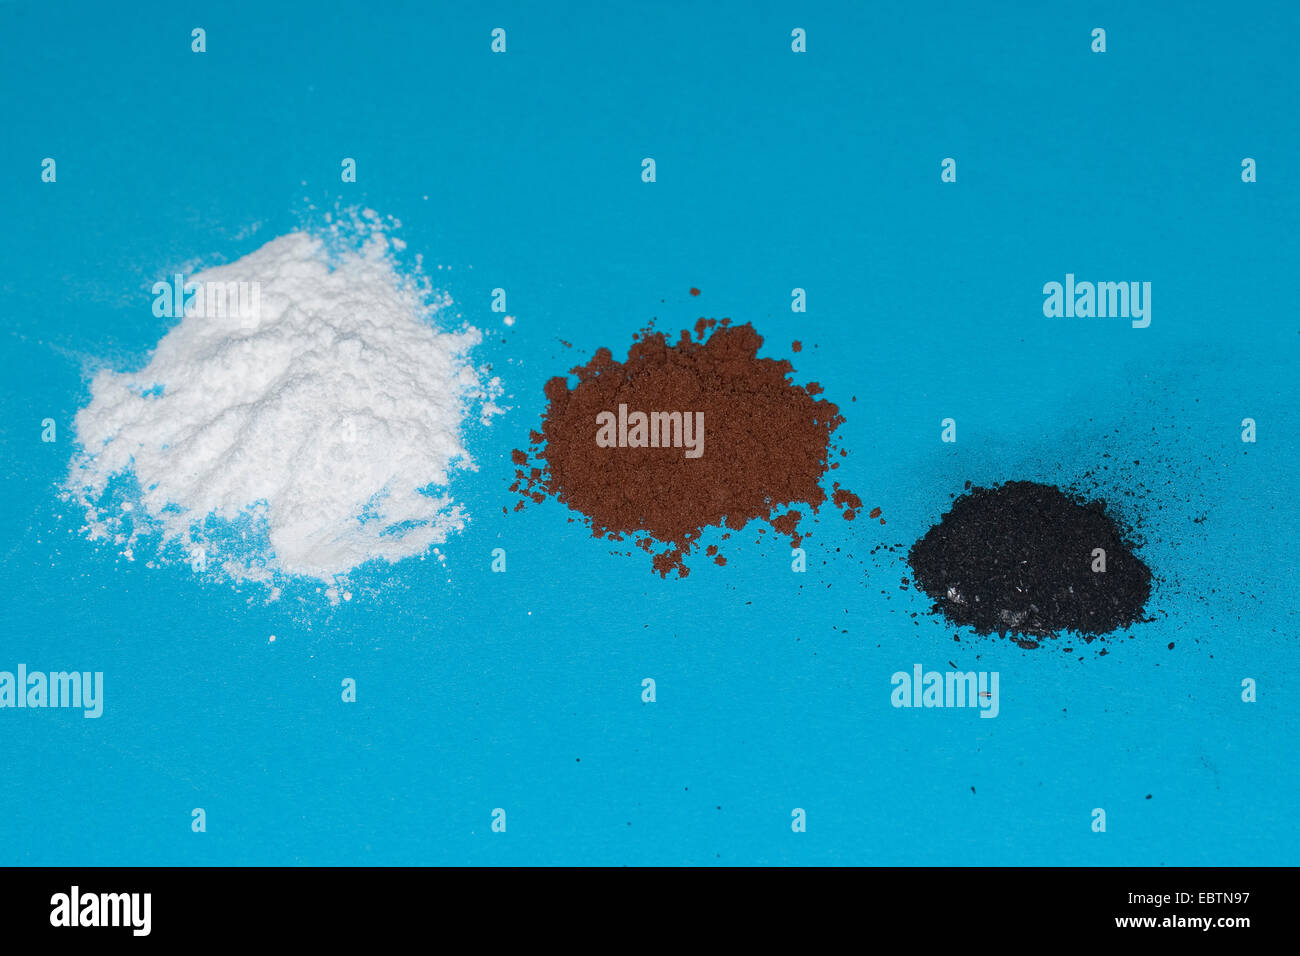 material for taking fingerprints: powder, cacao powder, graphite from a pencil Stock Photo